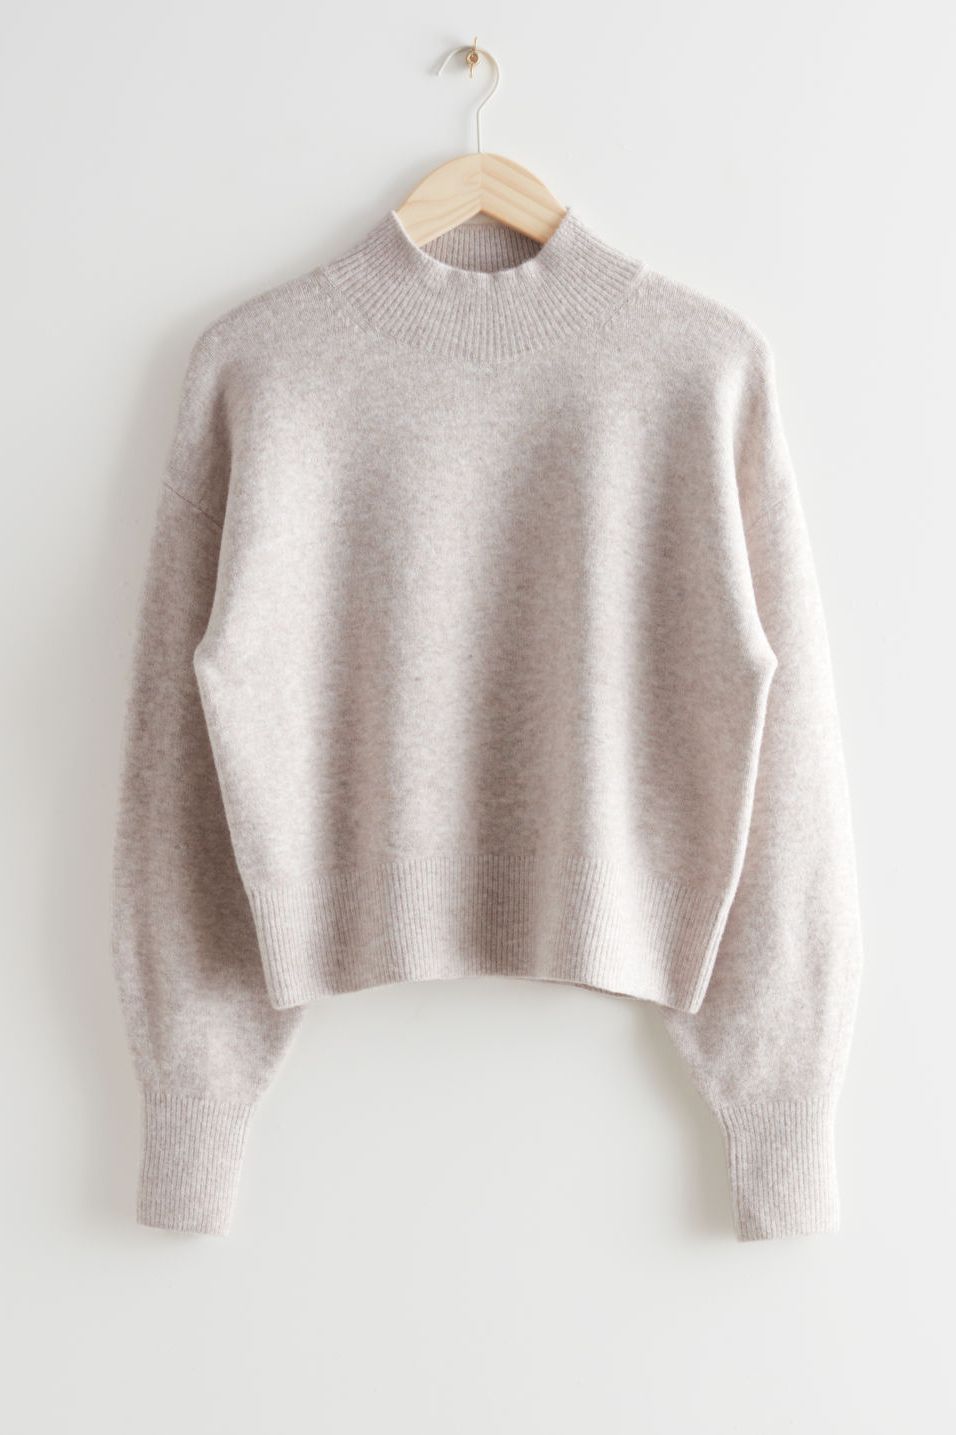  Other Stories mock neck jumper in off white